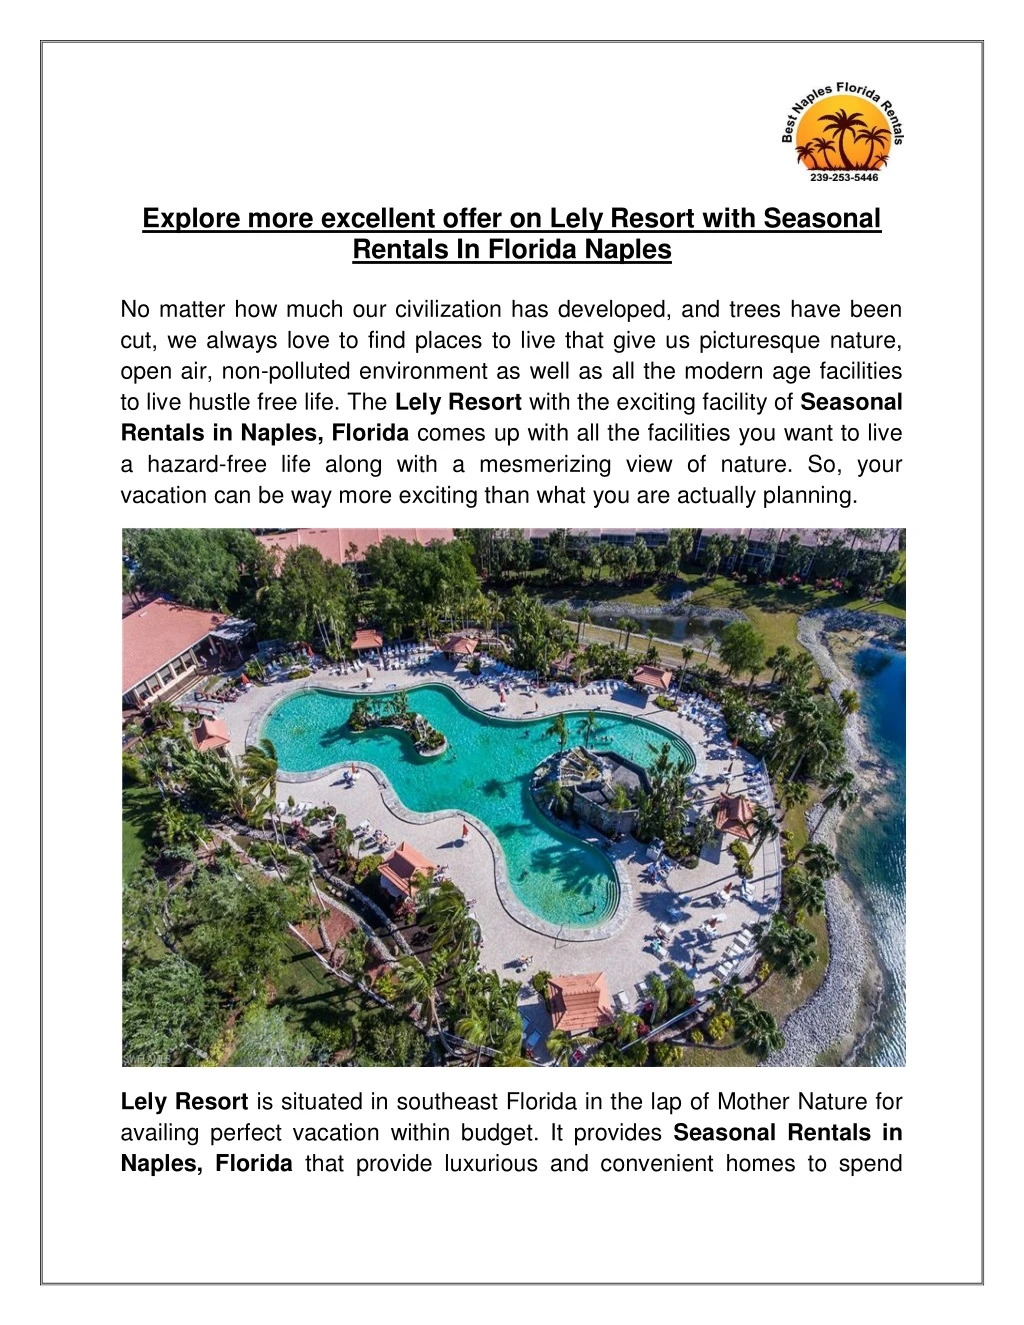 explore more excellent offer on lely resort with